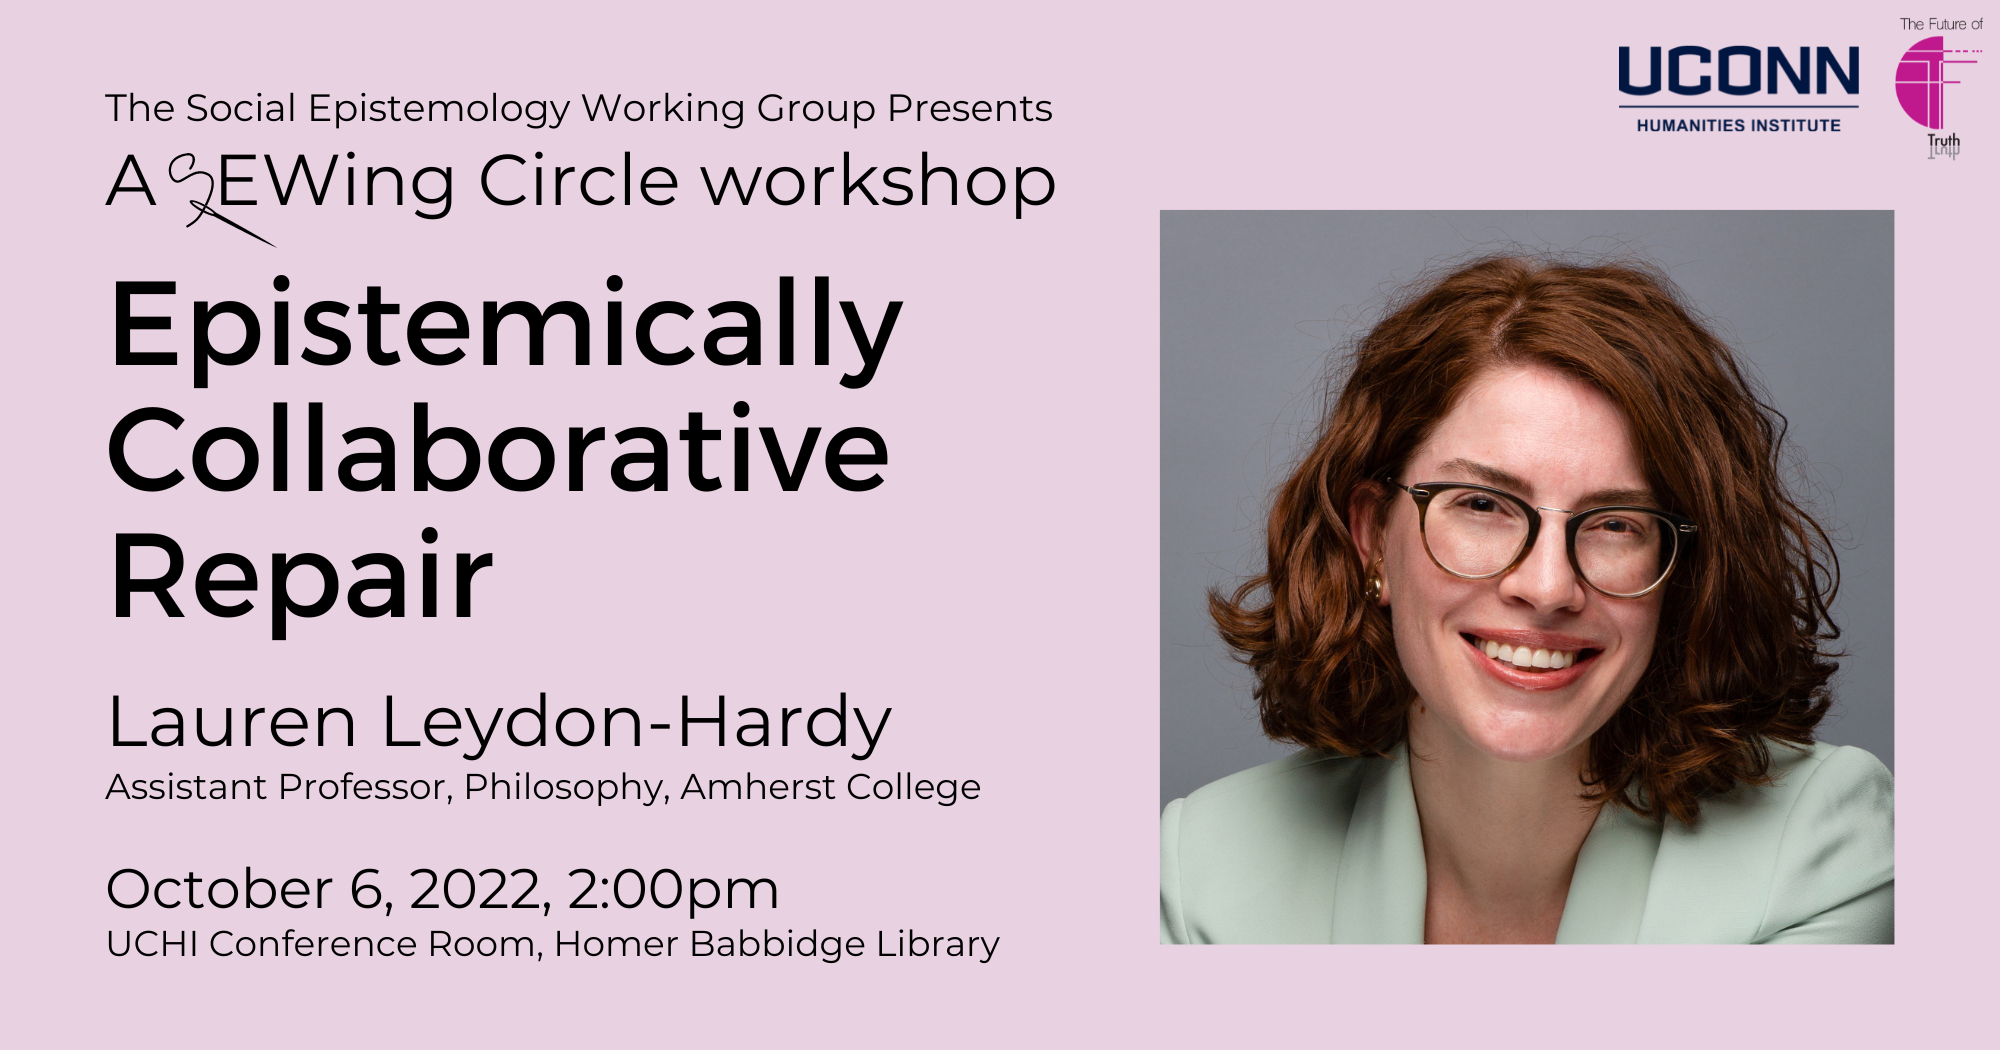 The Social Epistemology Working Group Presents a SEWing circle workshop: Epistemically Collaborative Repair, Lauren Leydon-Hardy, Assistant Professor of Philosophy, Amherst College. October 6, 2020, 2:00pm. UCHI conference room.